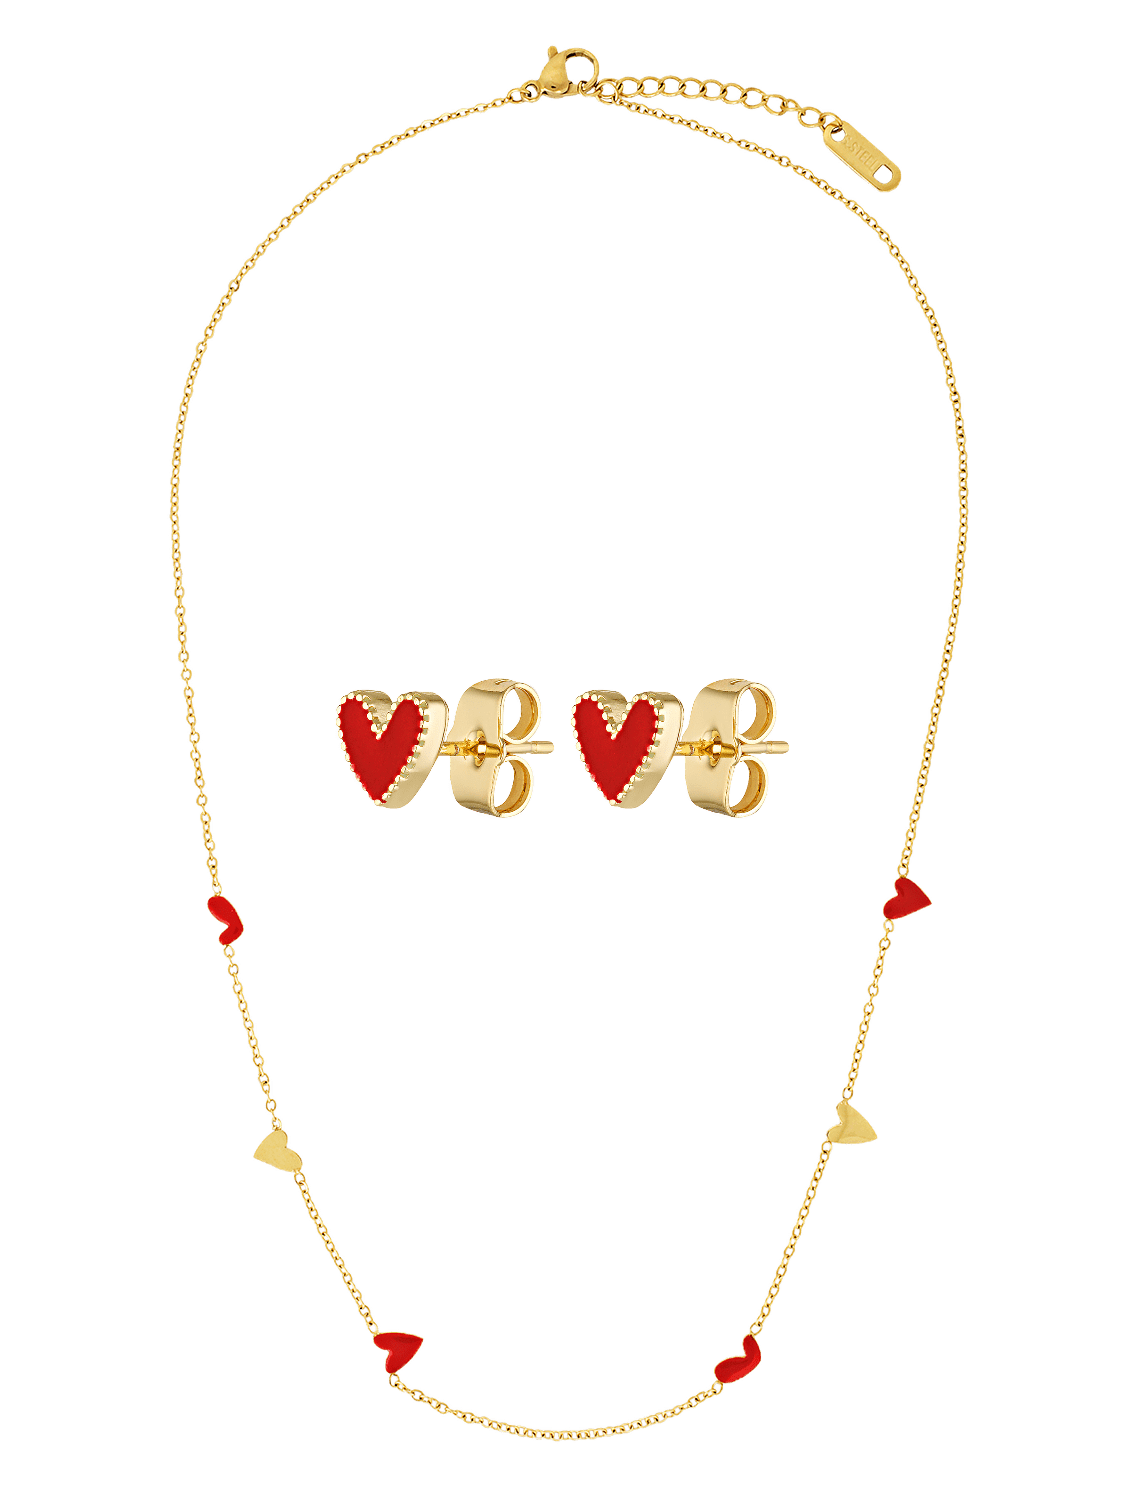 Gold necklace and earrings with red enamel heart details